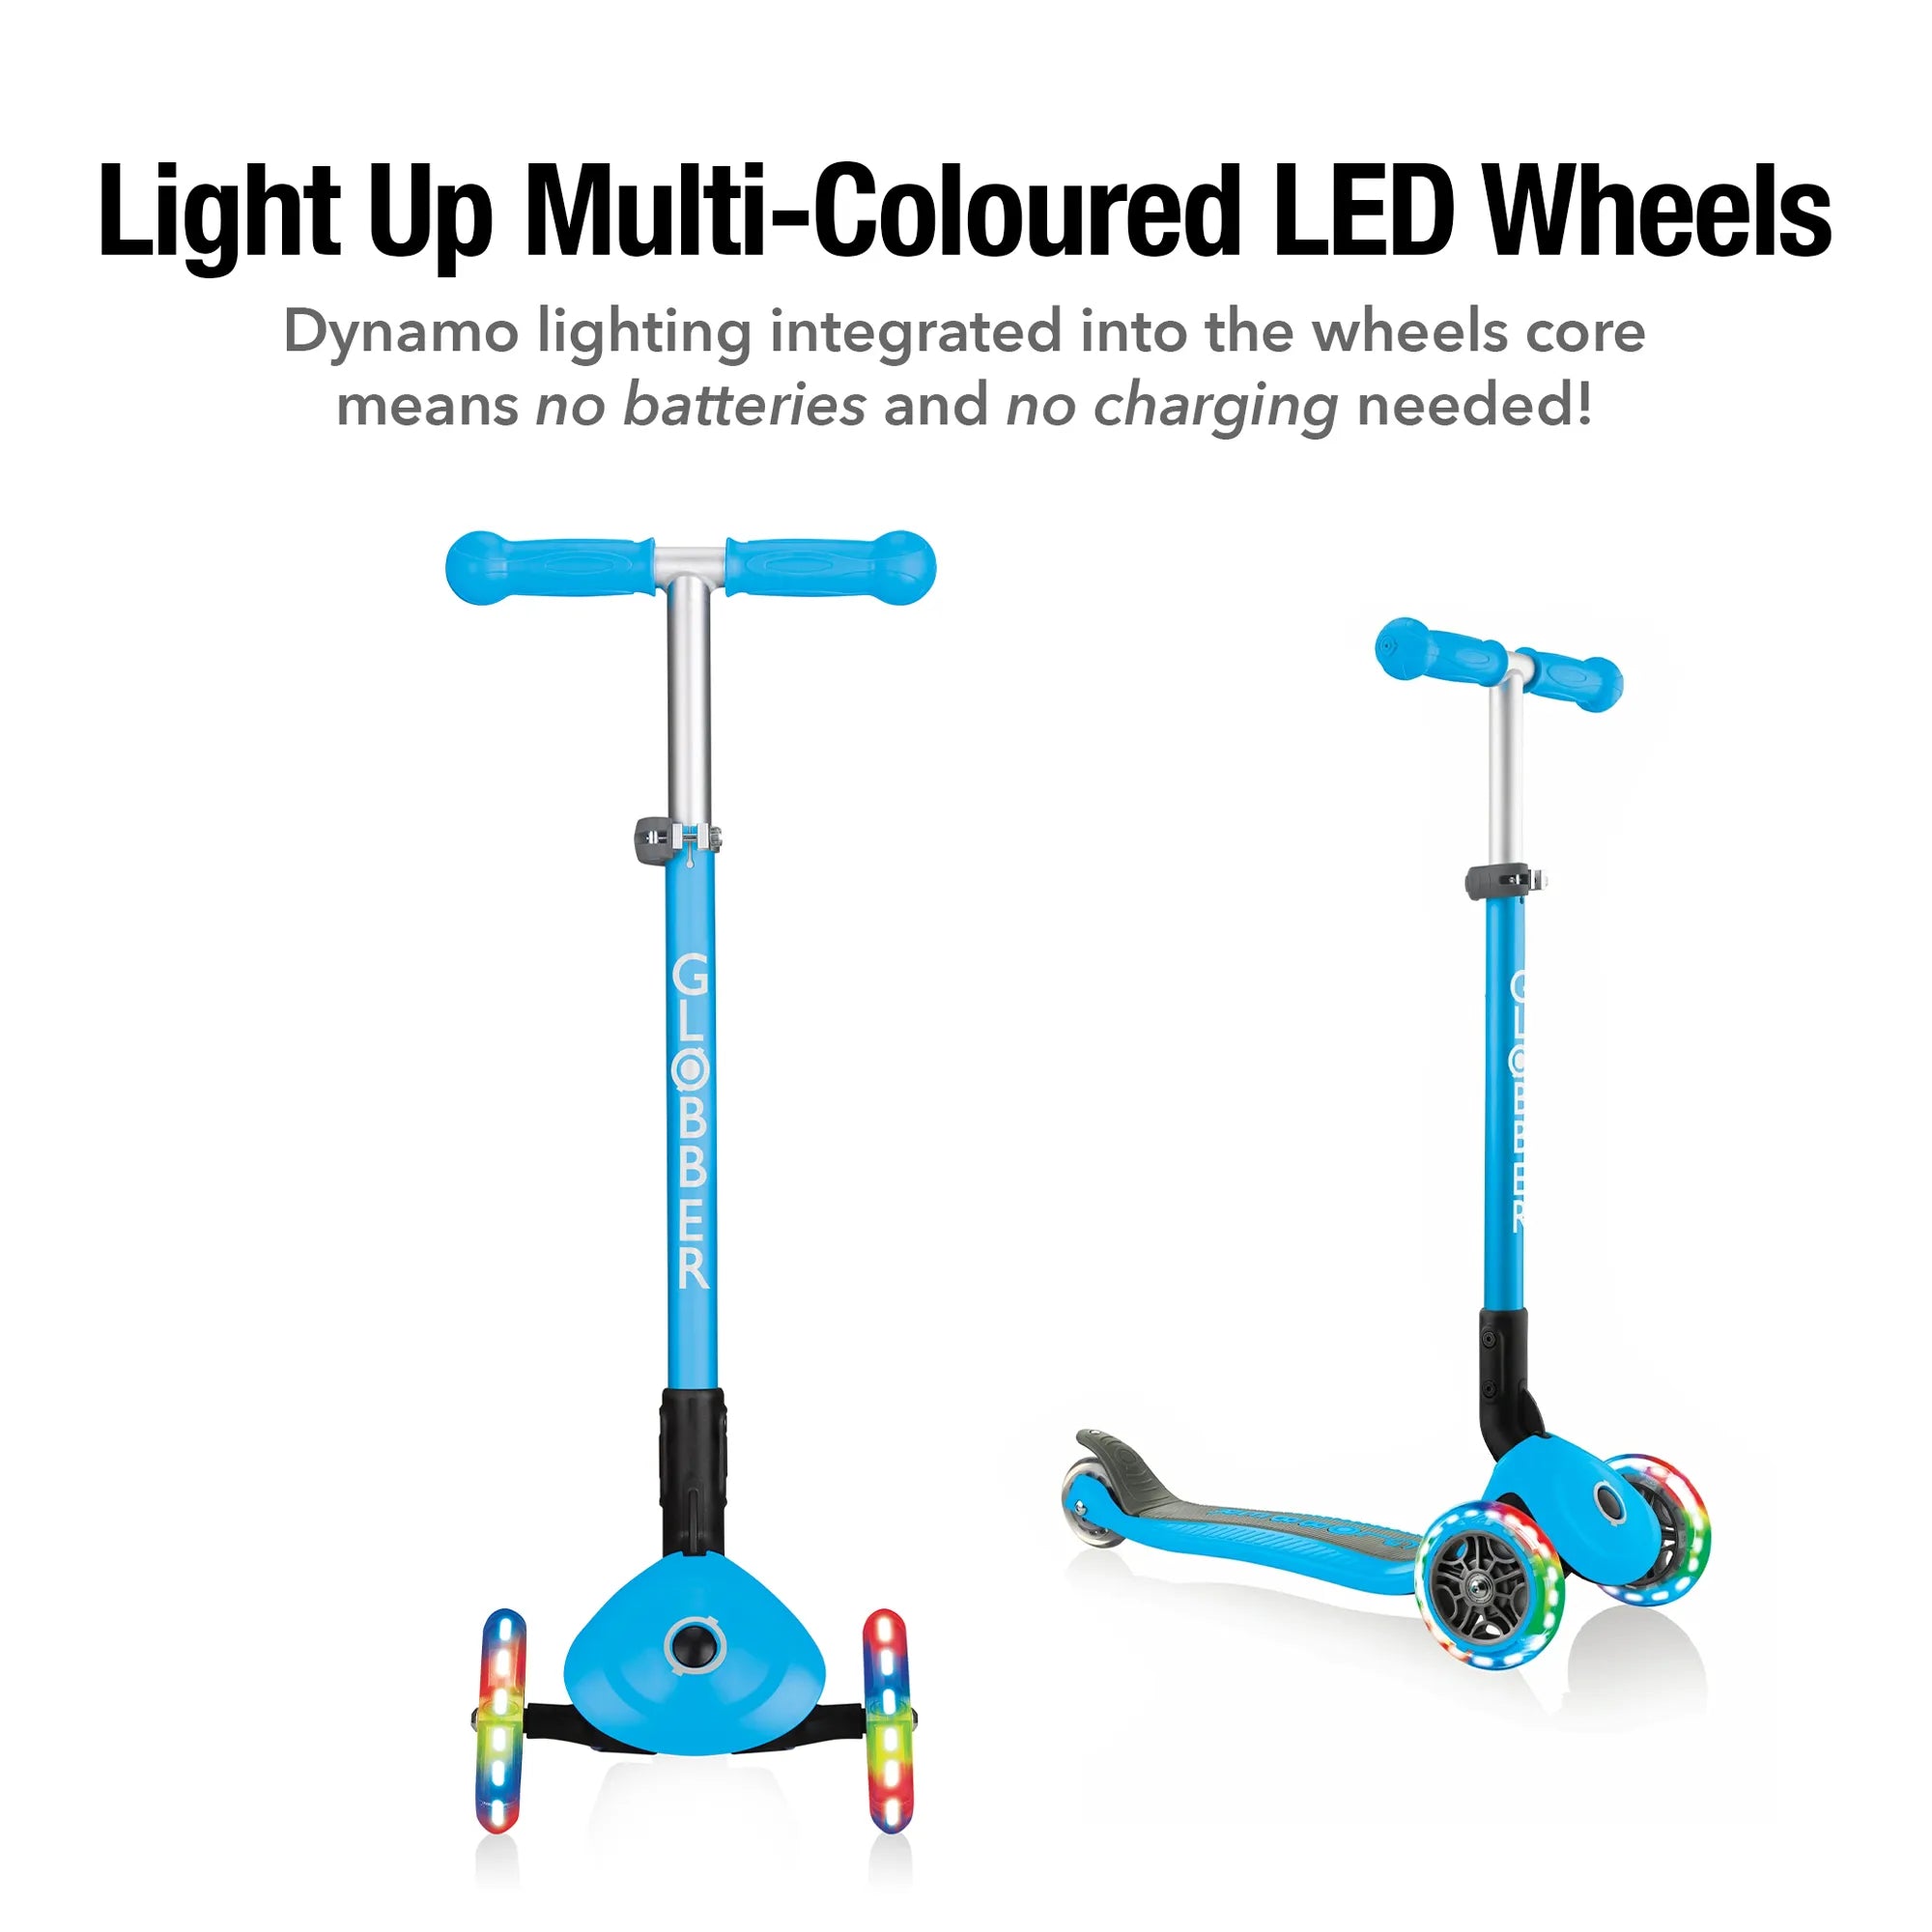 Globber Primo Foldable Lights - Sky Blue - Award-Winning Scooter - Ages 3-6+ - Brown's Hobby & Game